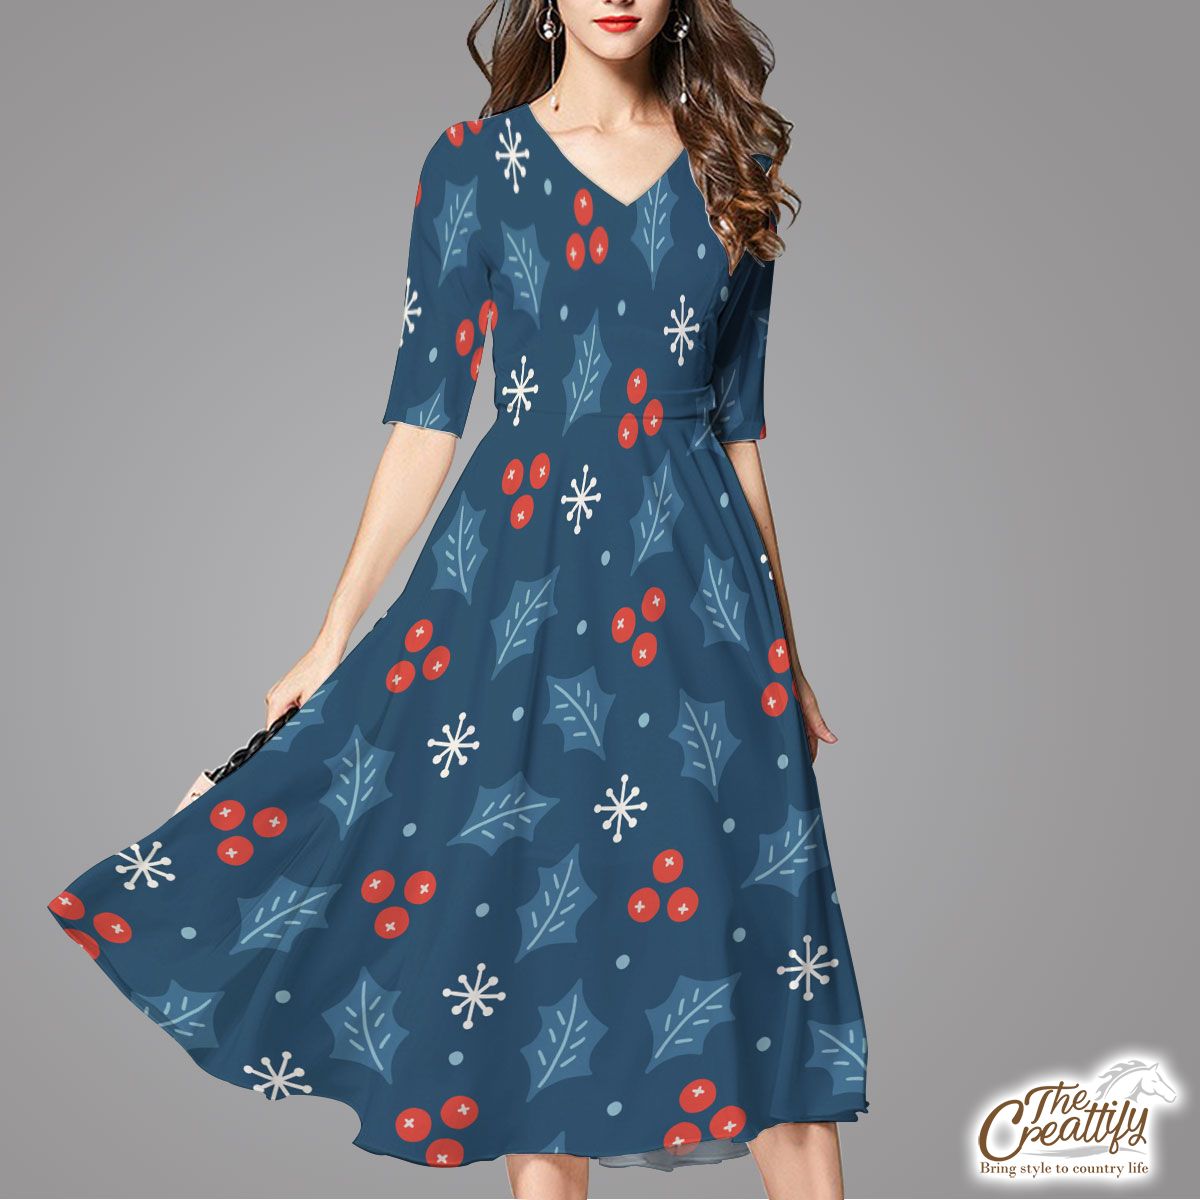 Snowflake And Holly Leaf Pattern Flare Dress